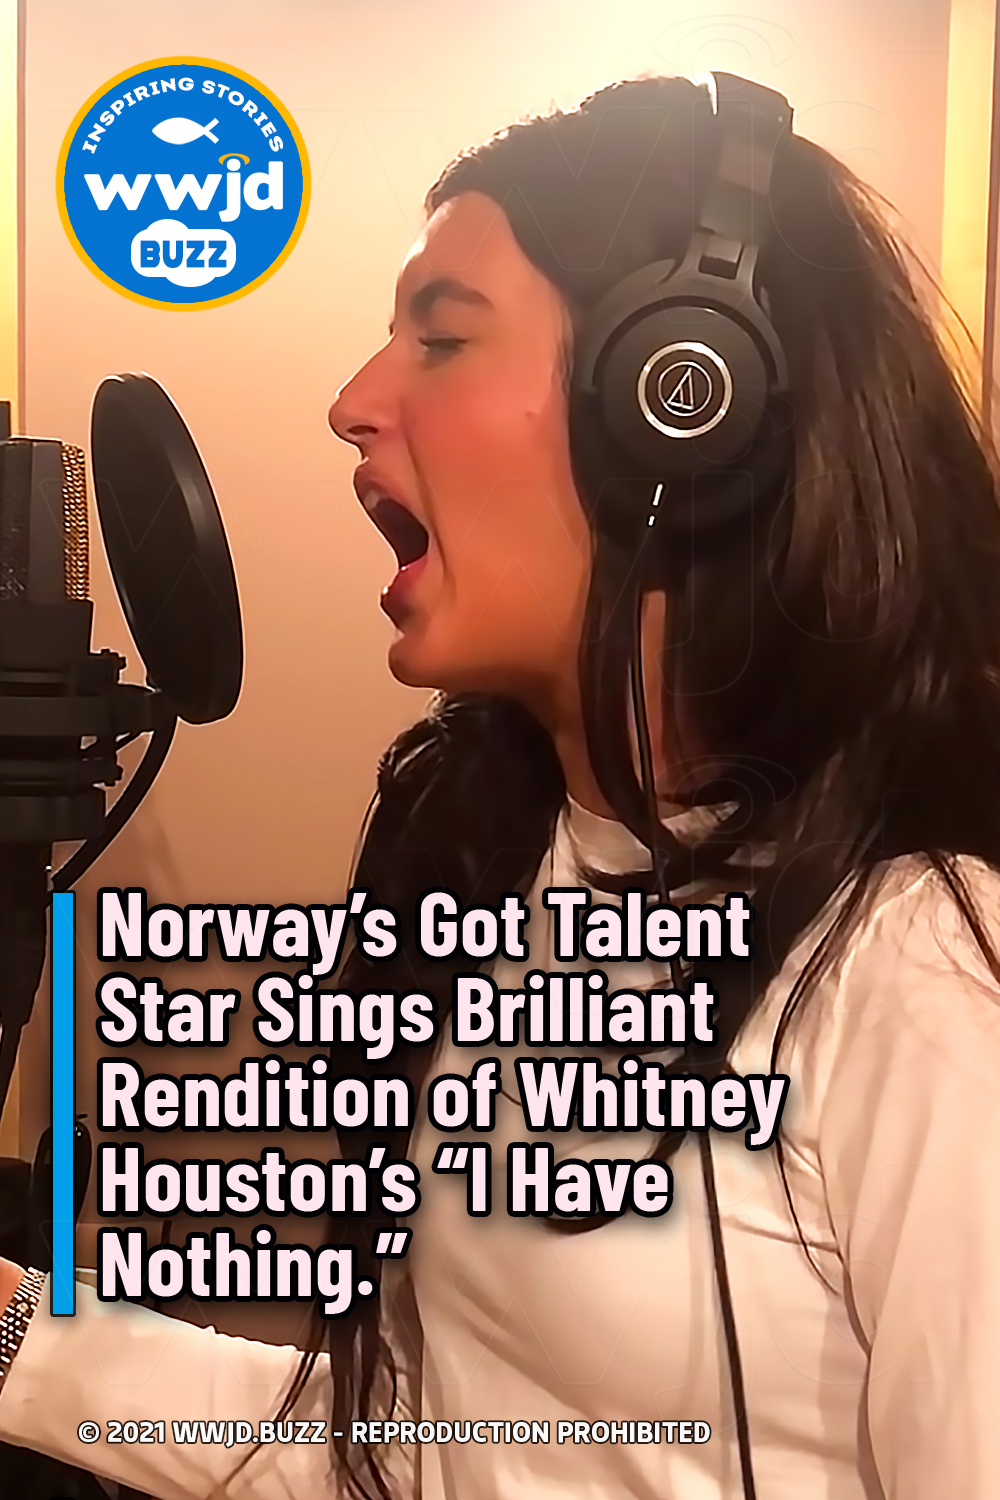 Norway’s Got Talent Star Sings Brilliant Rendition of Whitney Houston’s “I Have Nothing.”